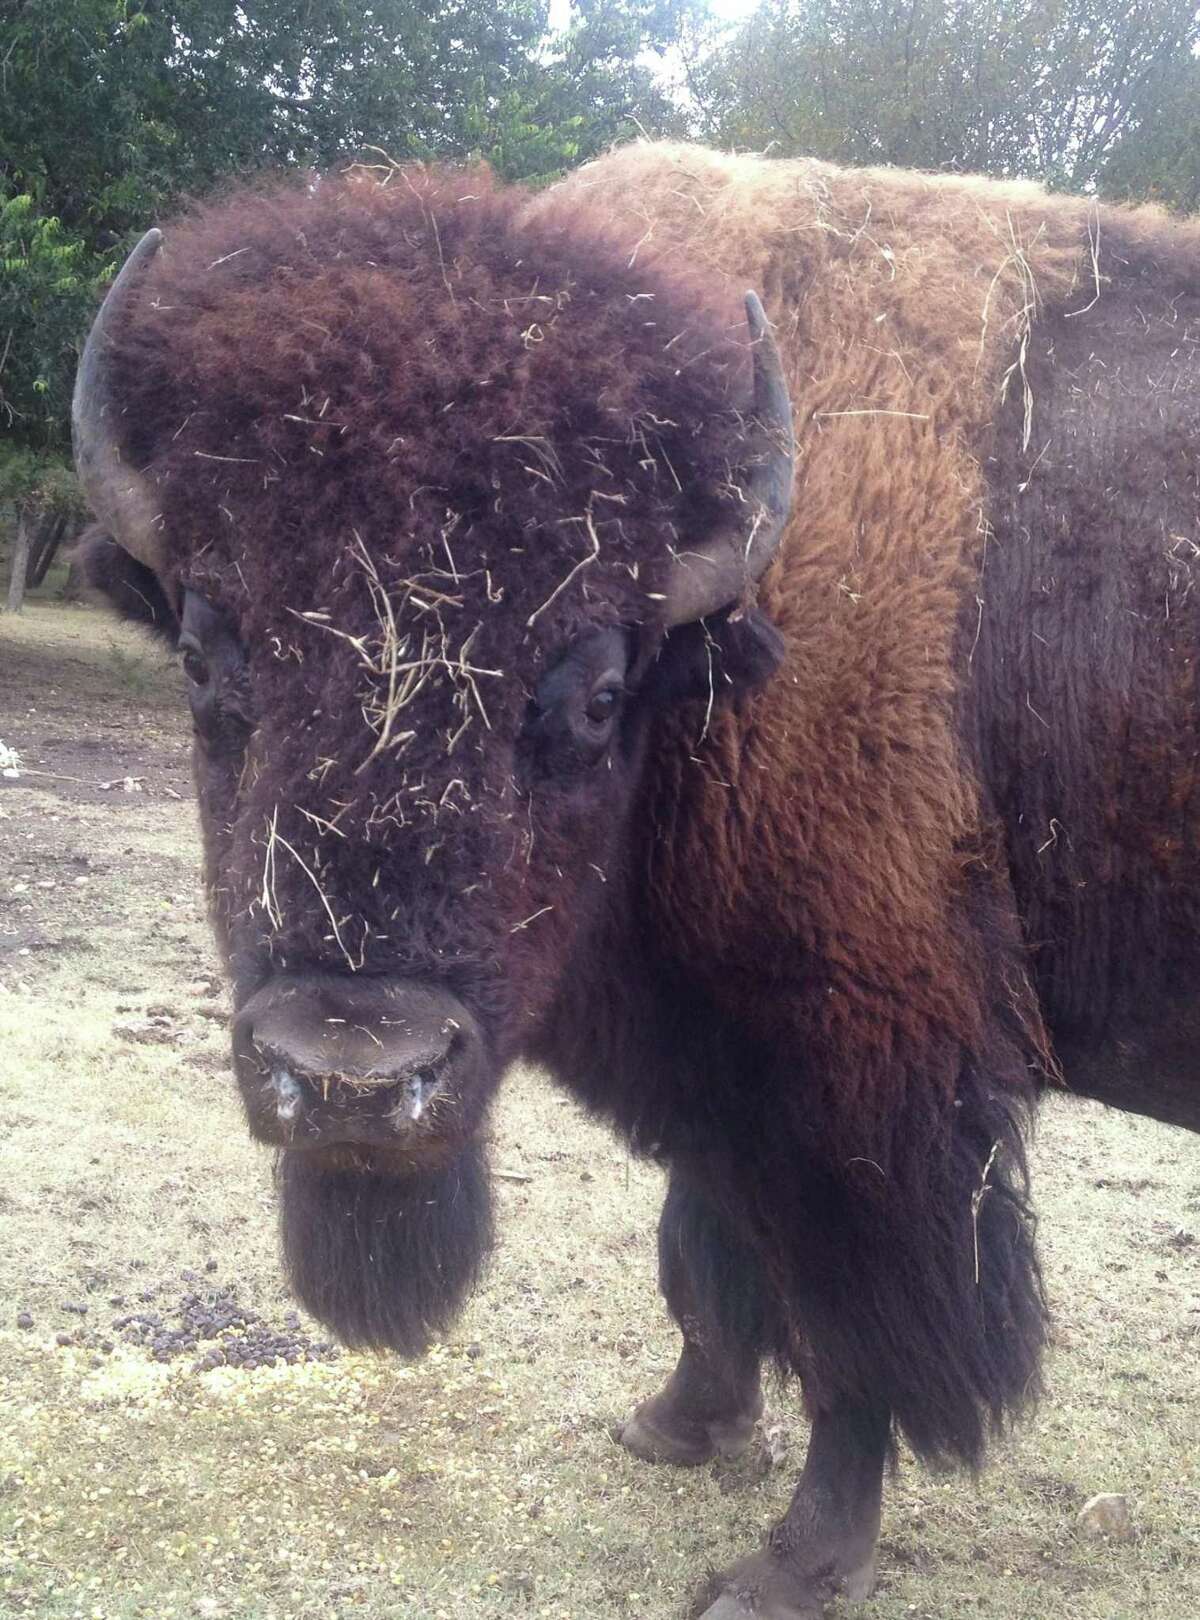 Buster, a bison on the Fox Creek Ranch, likes to play with new bales of hay when they’re set out for feed, says owner Charles Wilson. It looks like the bull just finished one off.